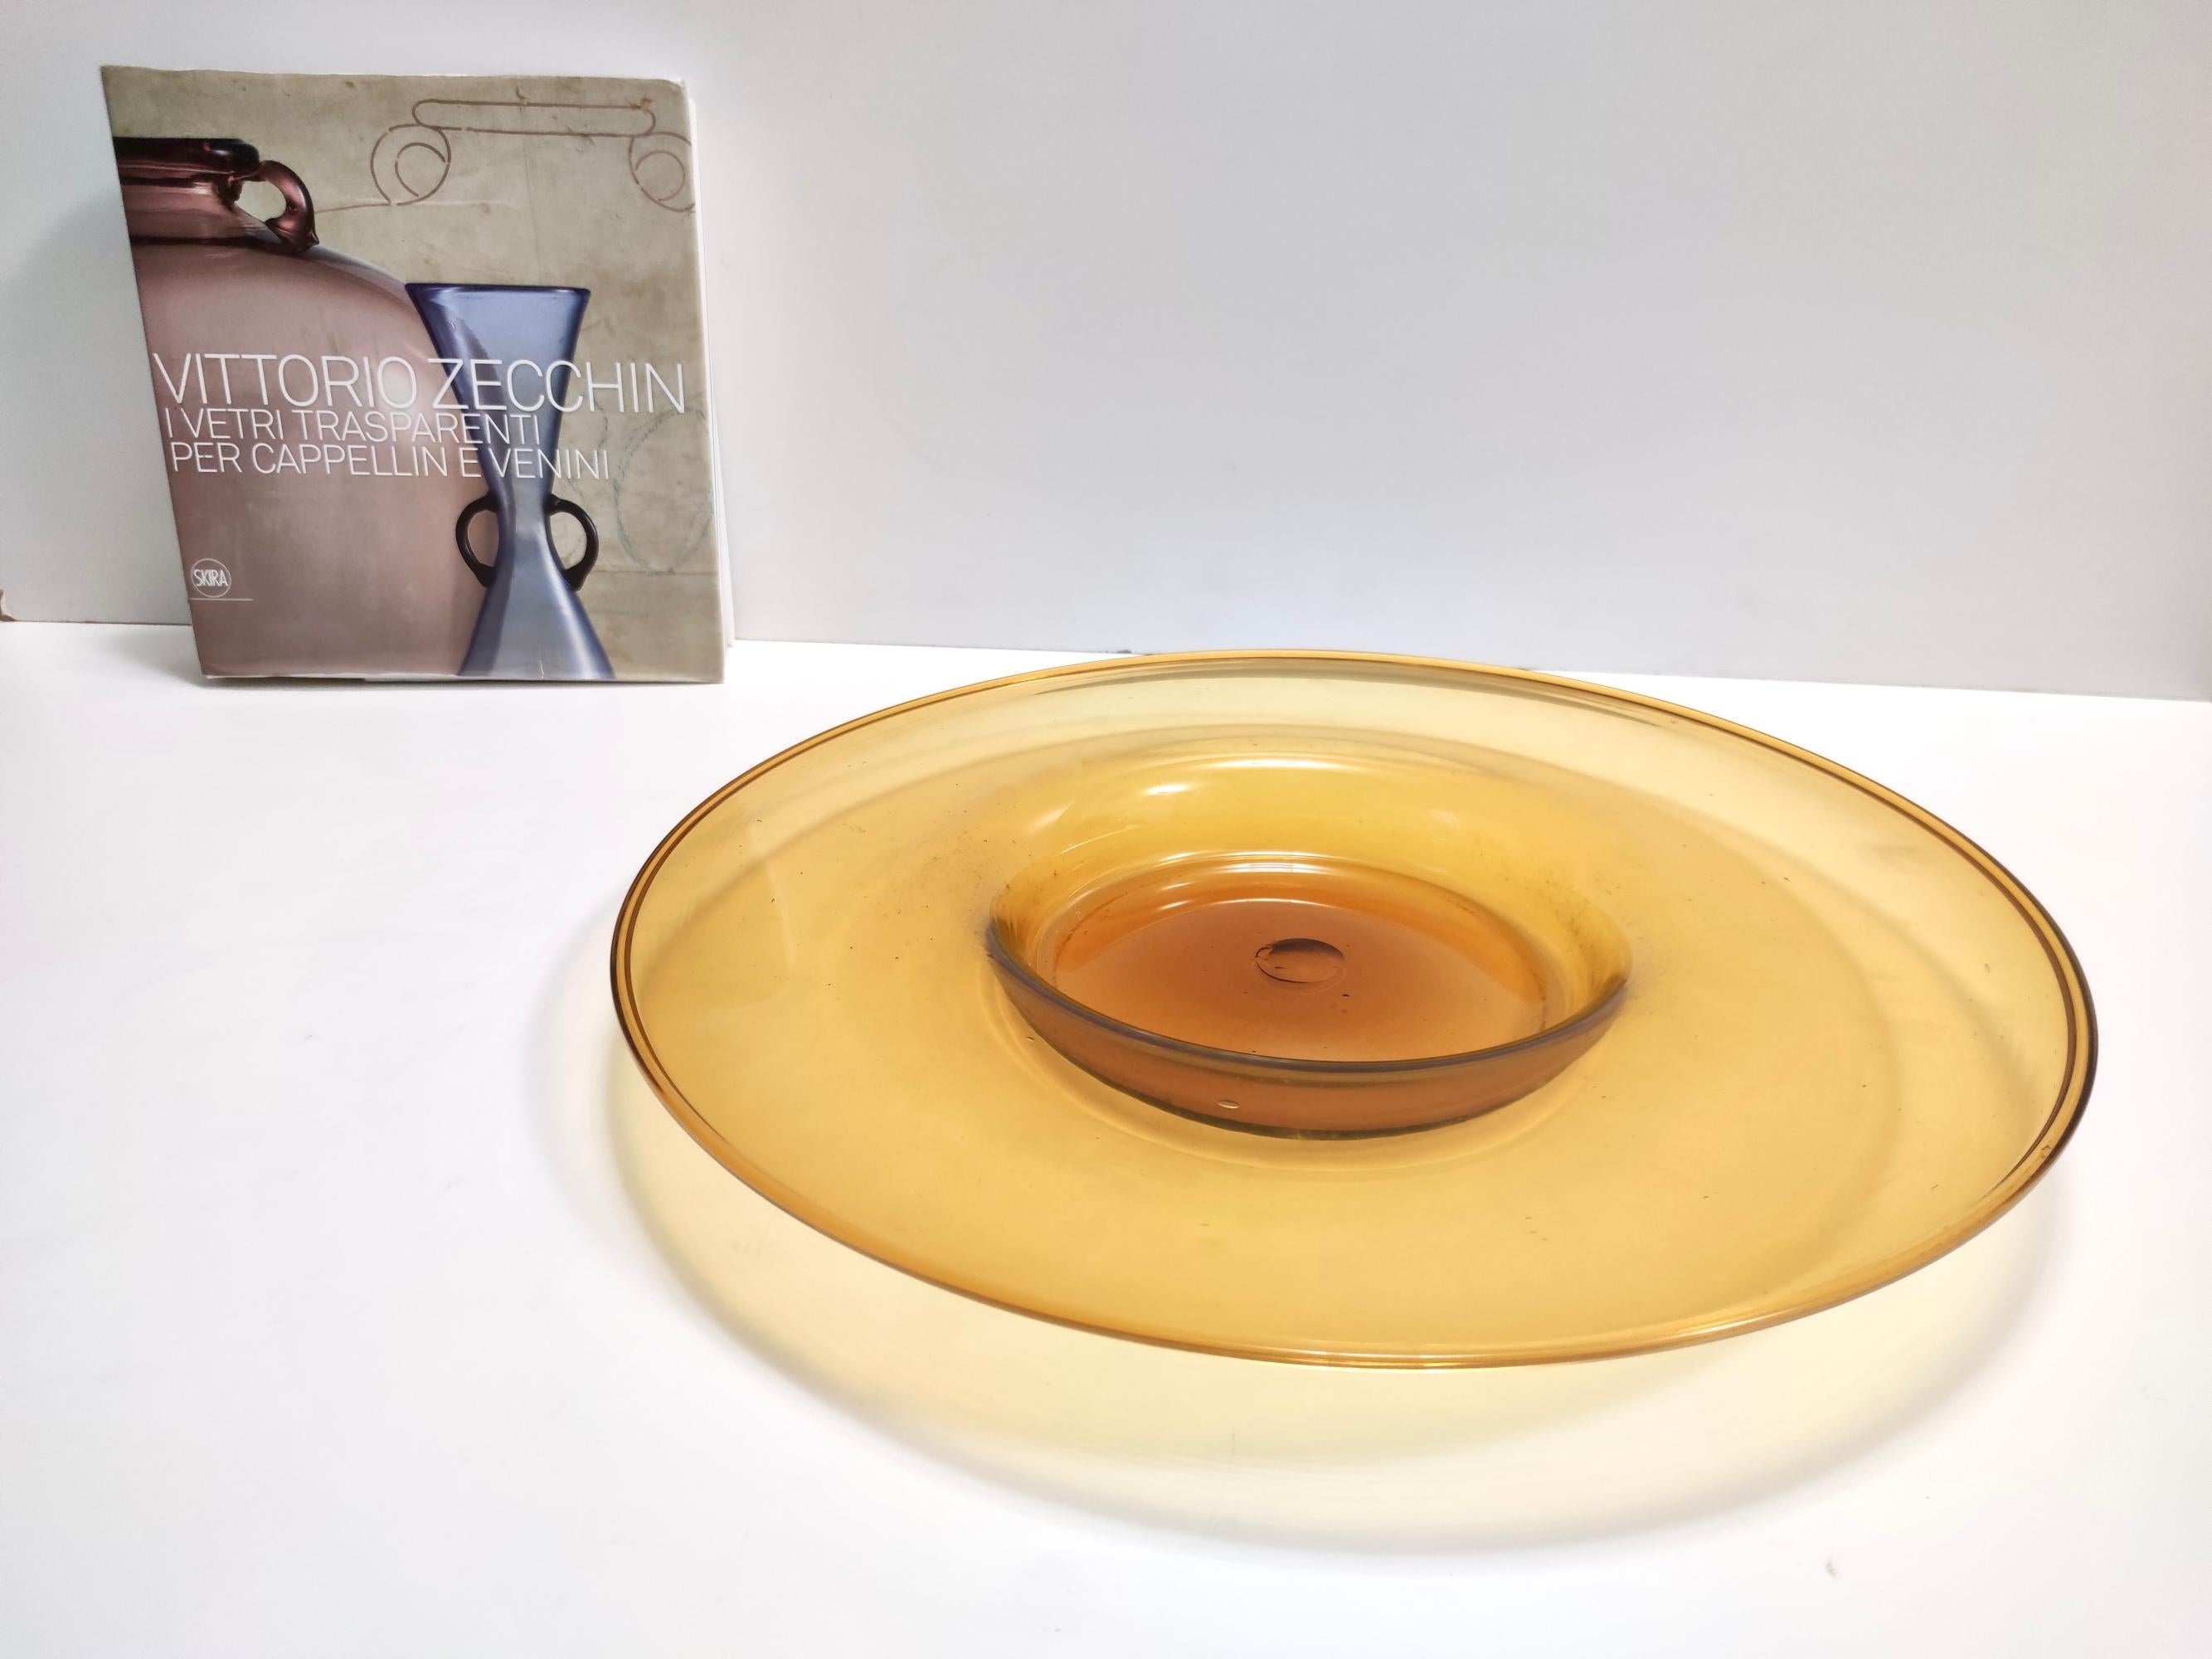 Made in Italy, 1921 - 1922. 
This stunning trinket bowl / vide-poche is made in orange hand-blown Murano glass.
It was presented at Salon D'Automne in Paris in 1922 and at the Biennale of Monza in 1923.
The color yellowish orange makes it quite rare